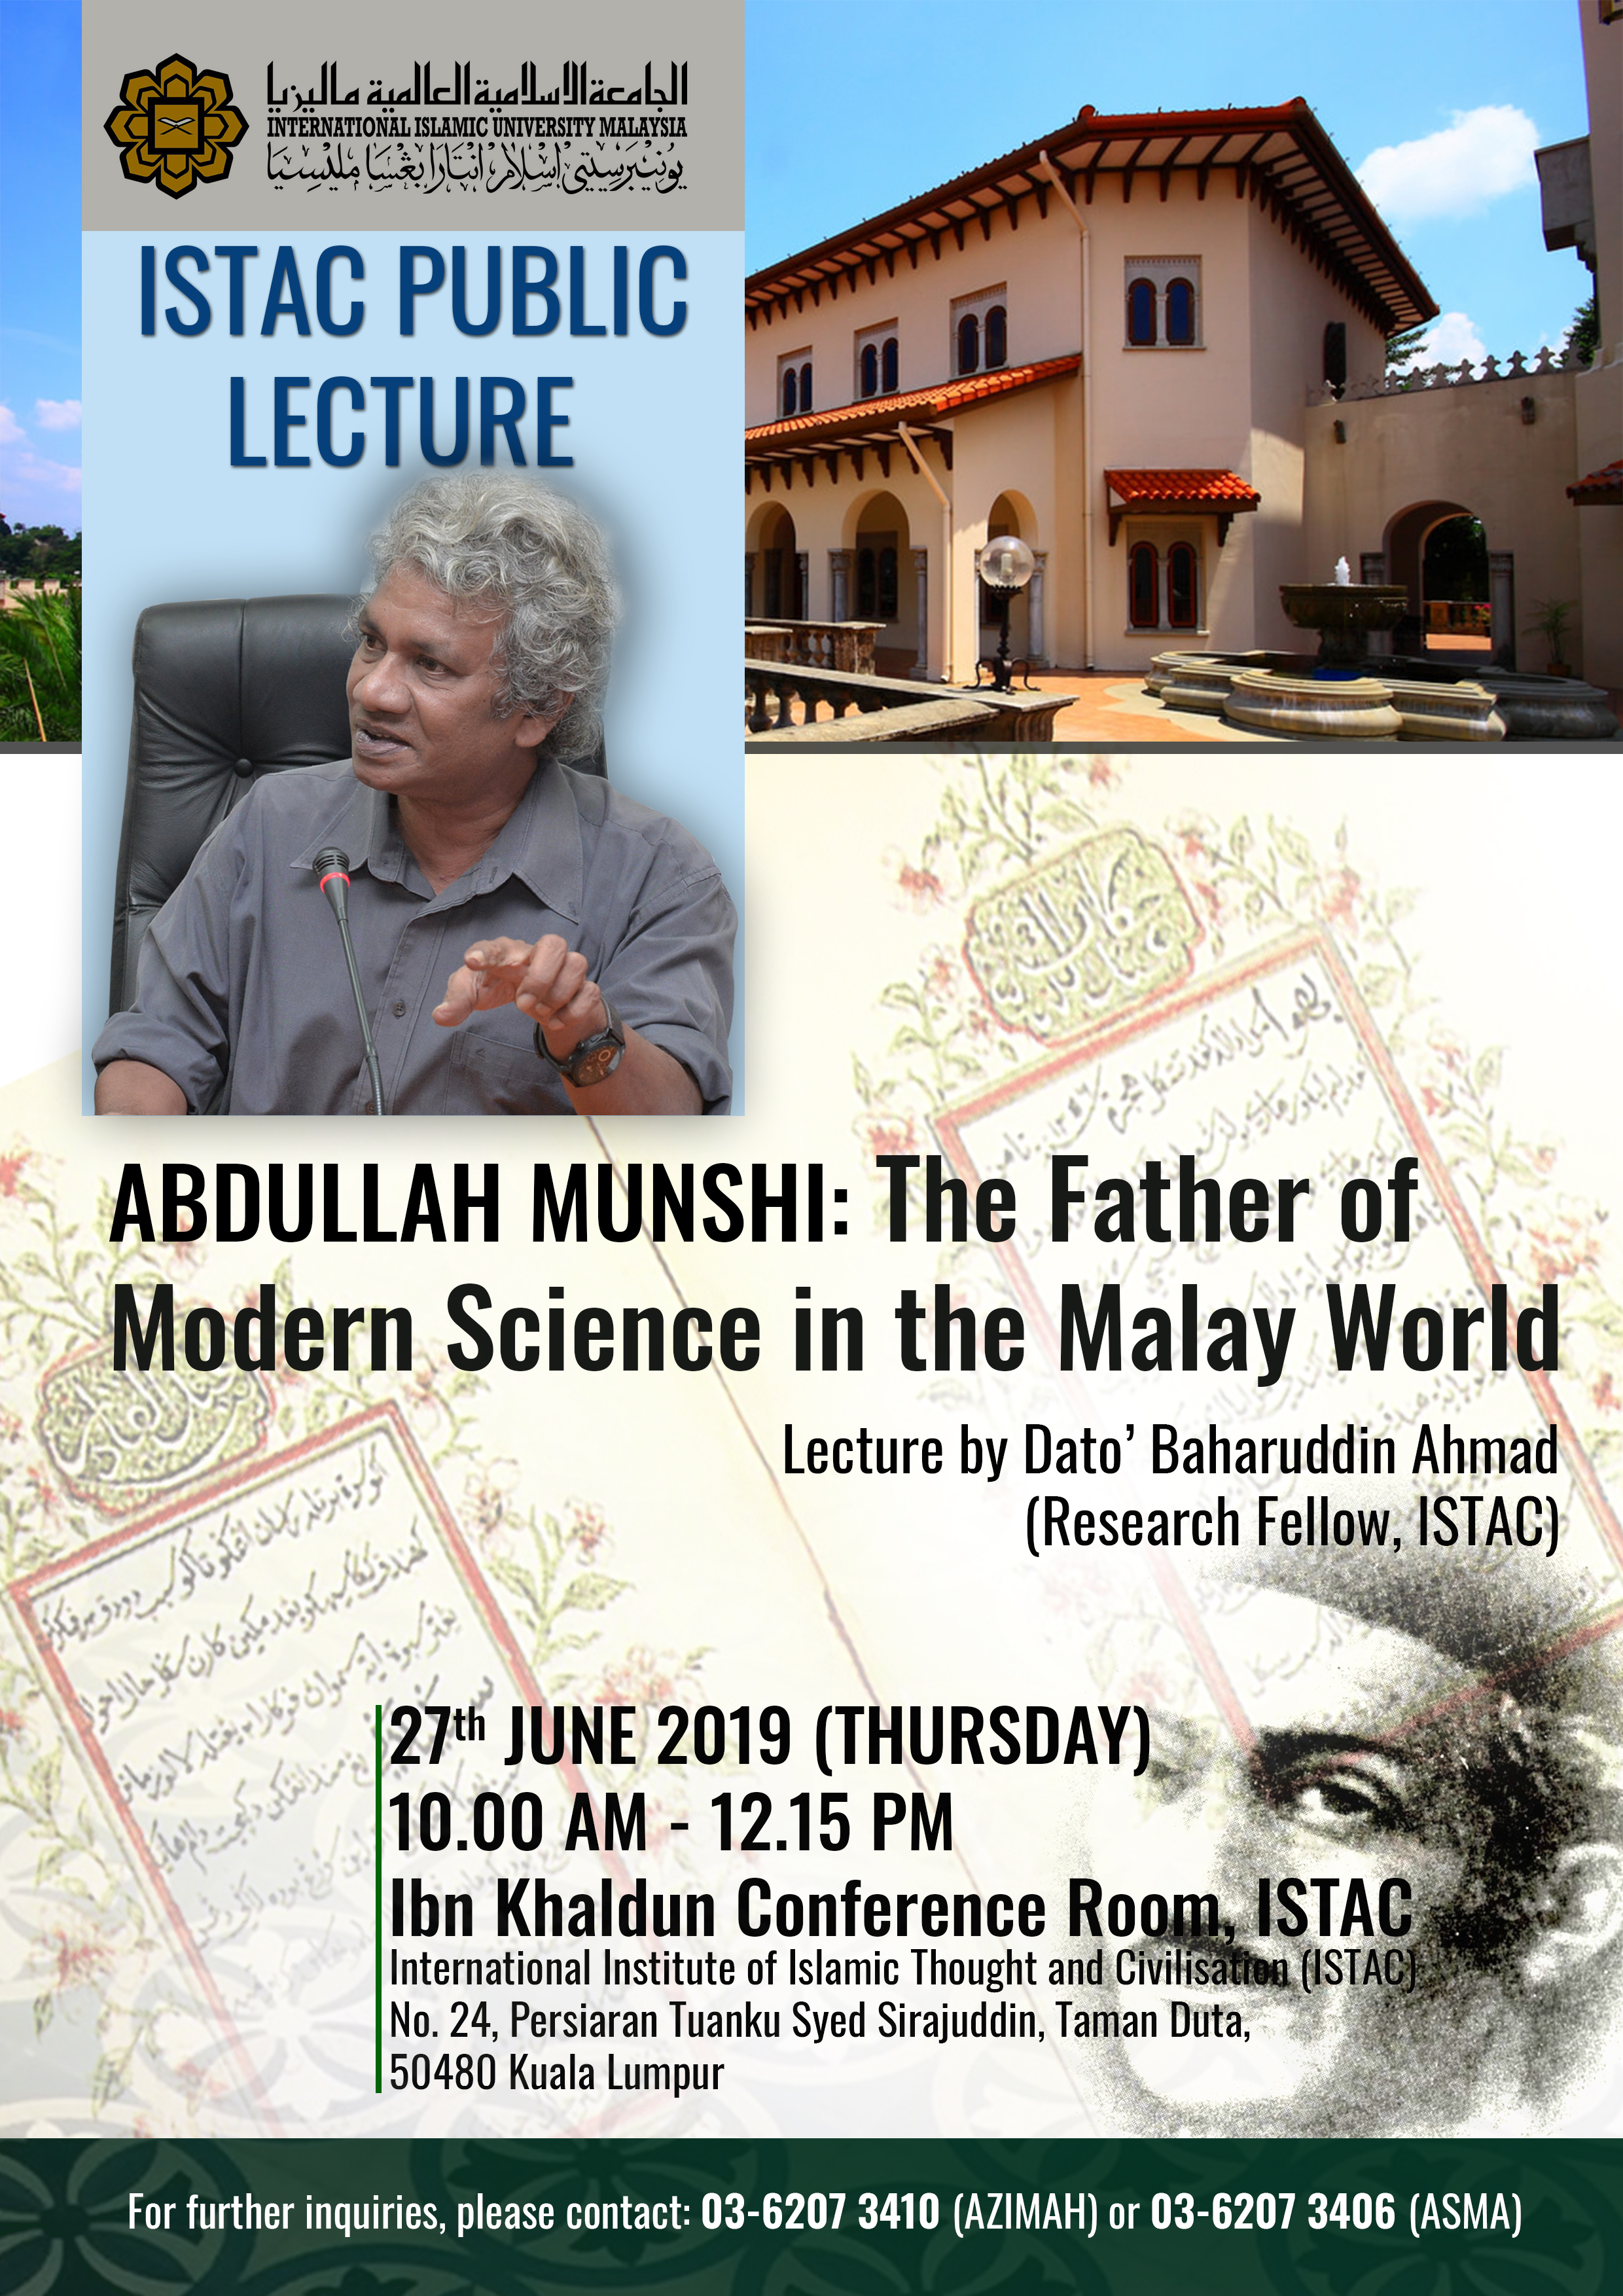 ISTAC PUBLIC LECTURE - ABDULLAH MUNSHI : THE FATHER OF MODERN SCIENCE IN THE MALAY WORLD